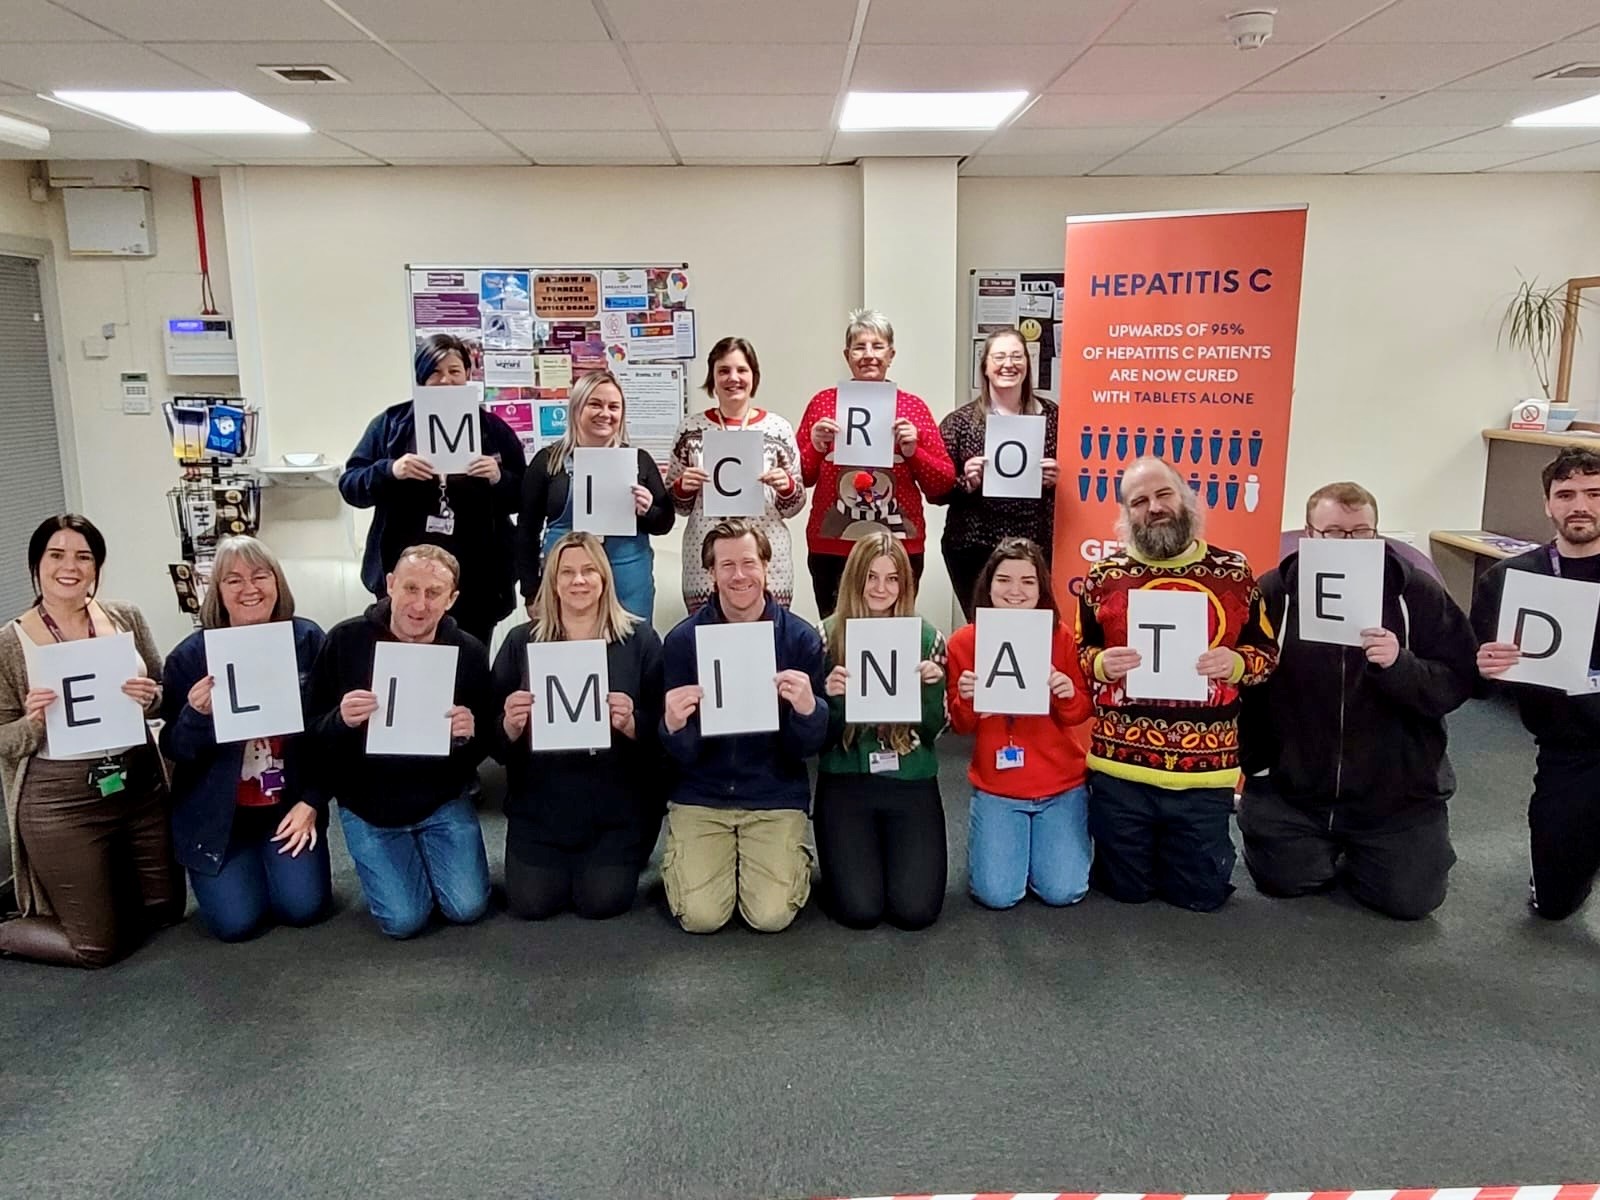 The Recovery Steps team in South Cumbria, each holding up a piece of paper that collectively spell 'Micro eliminated"